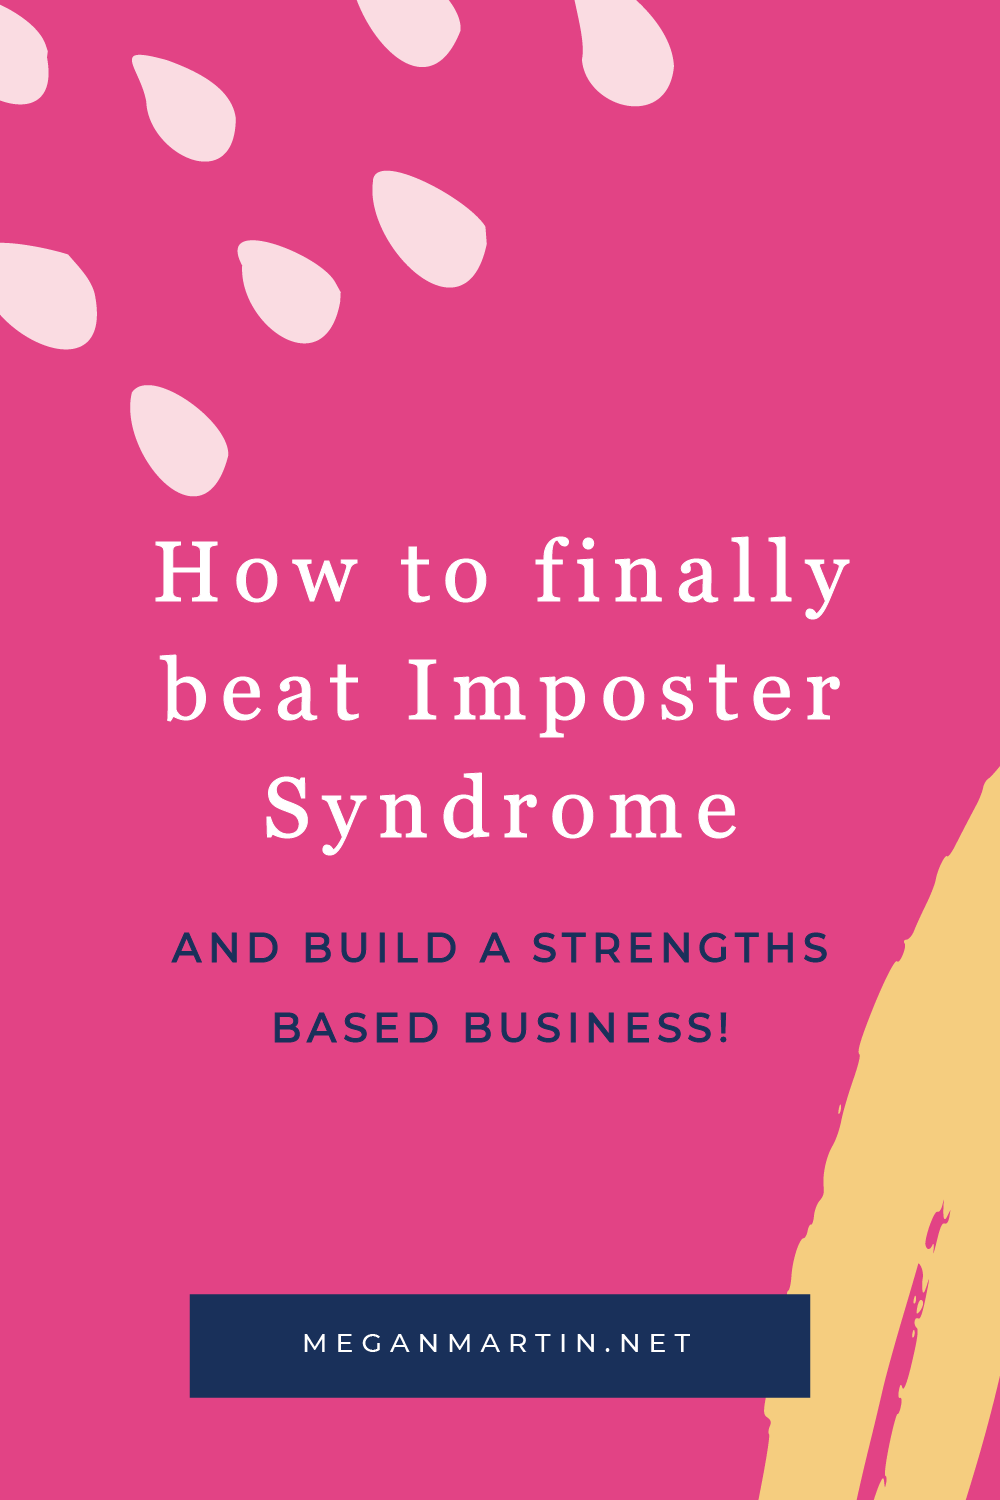 How to finally beat imposter syndrome and build a strengths based business